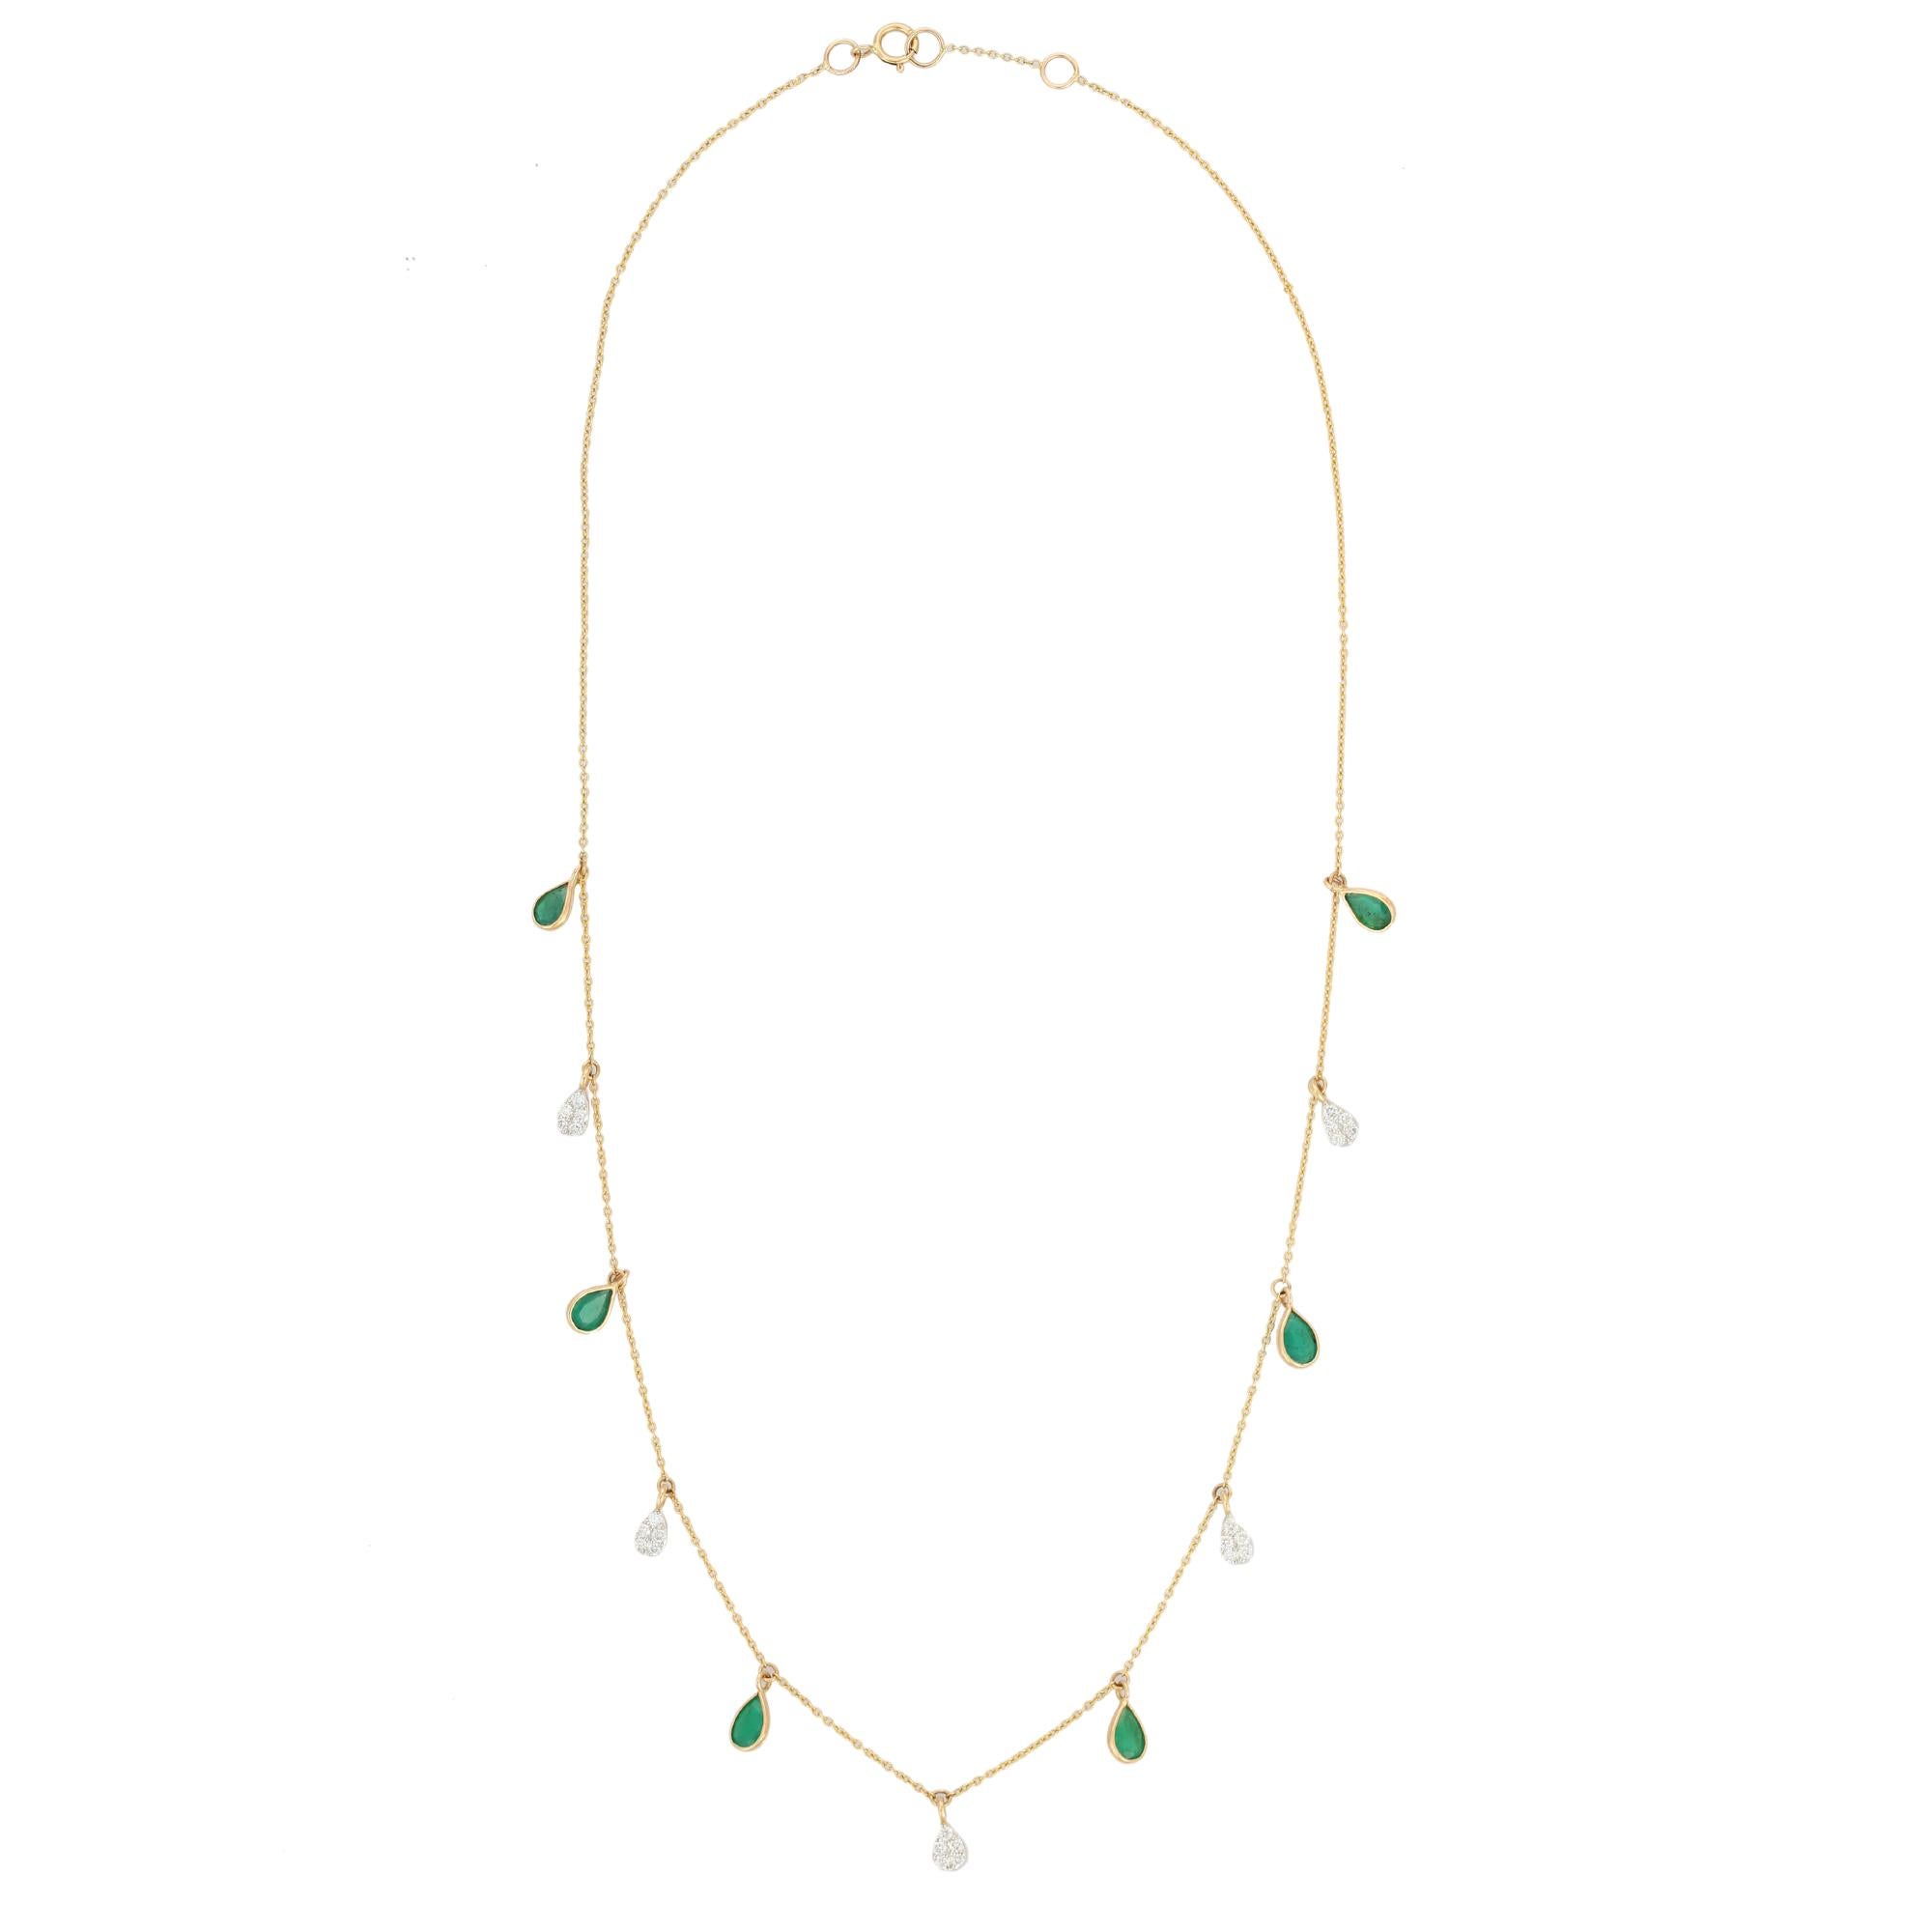 1.9 Carat Pear Cut Emerald and Diamond Drop Necklace in 18K Yellow Gold  For Sale 2